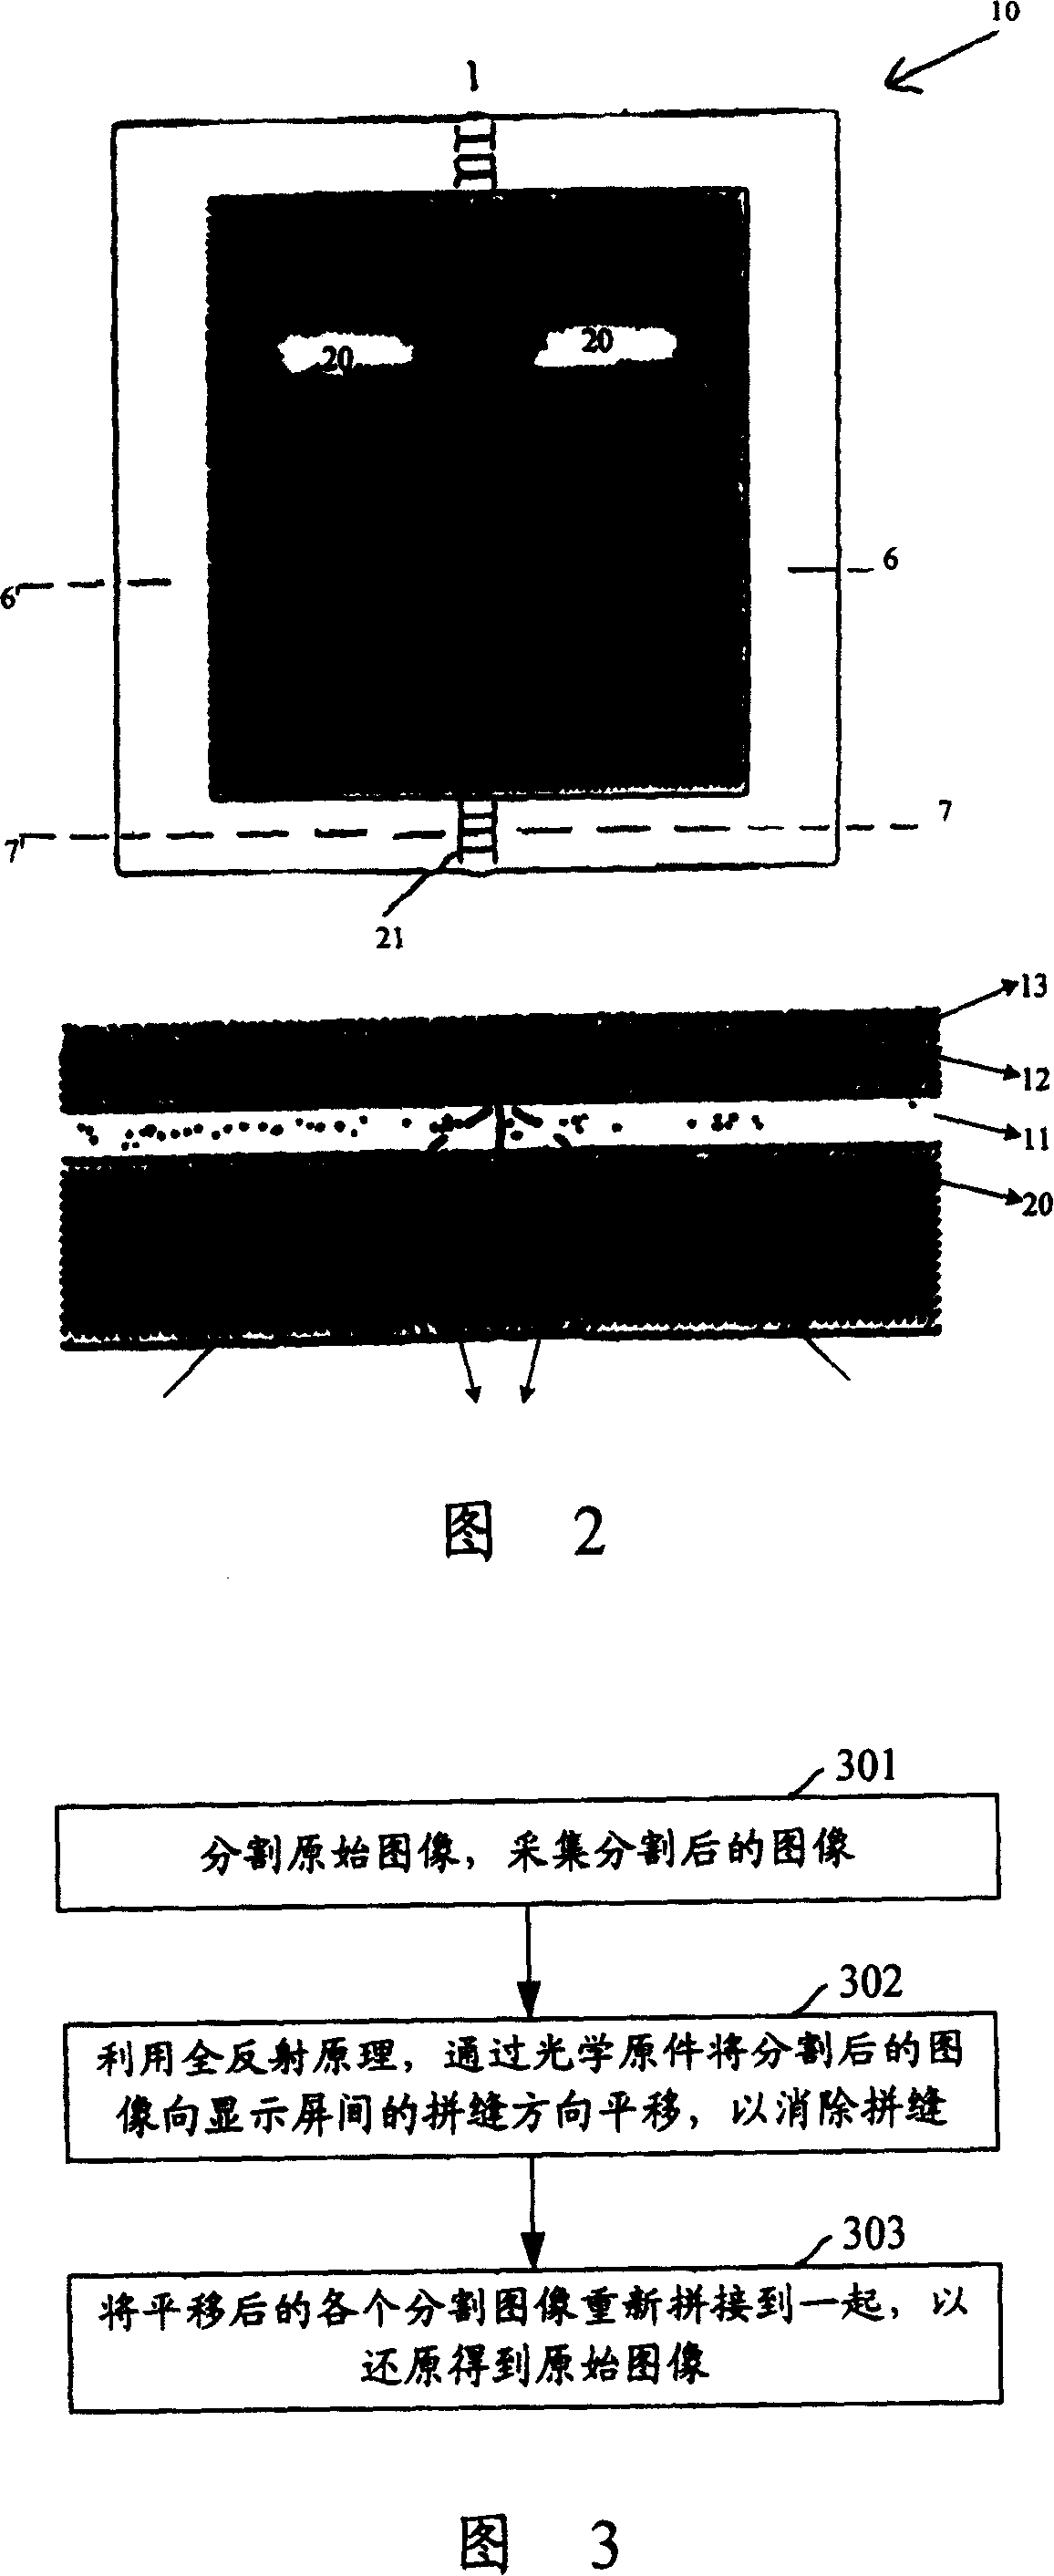 Method and device for eliminating seam between spliced display screens